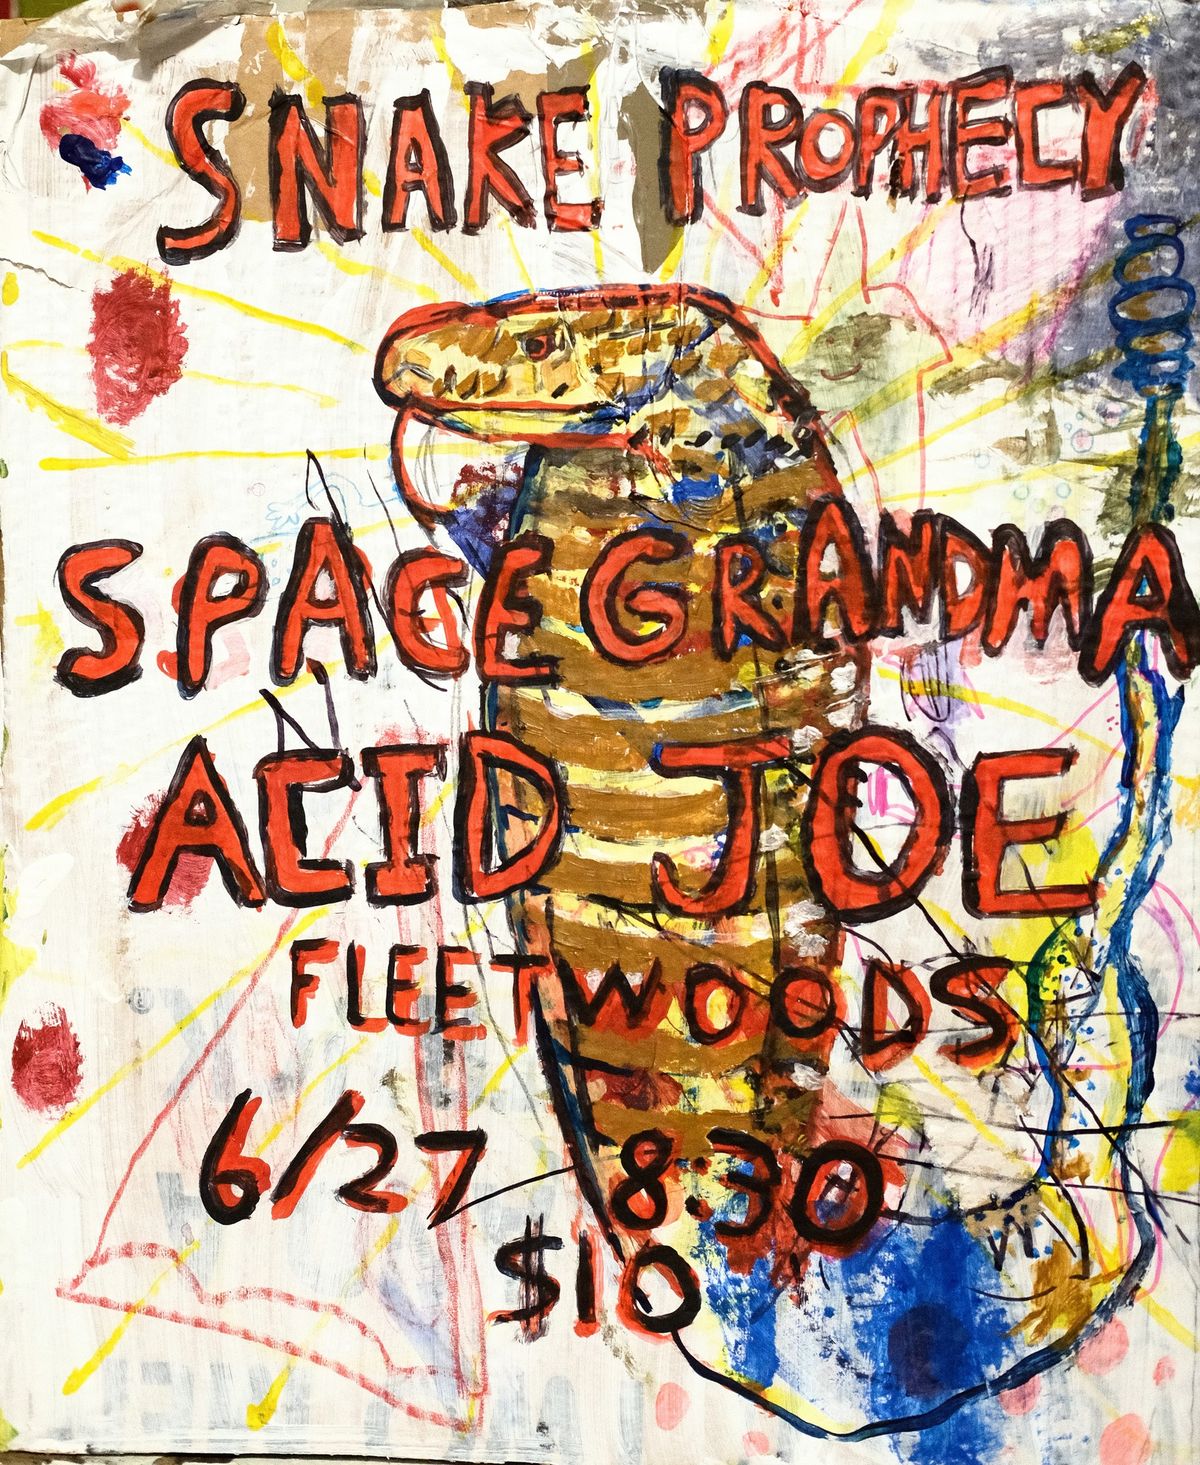 Wild and weird sounds abound from Space Gramma, Snake Prophecy and Acid Jo!